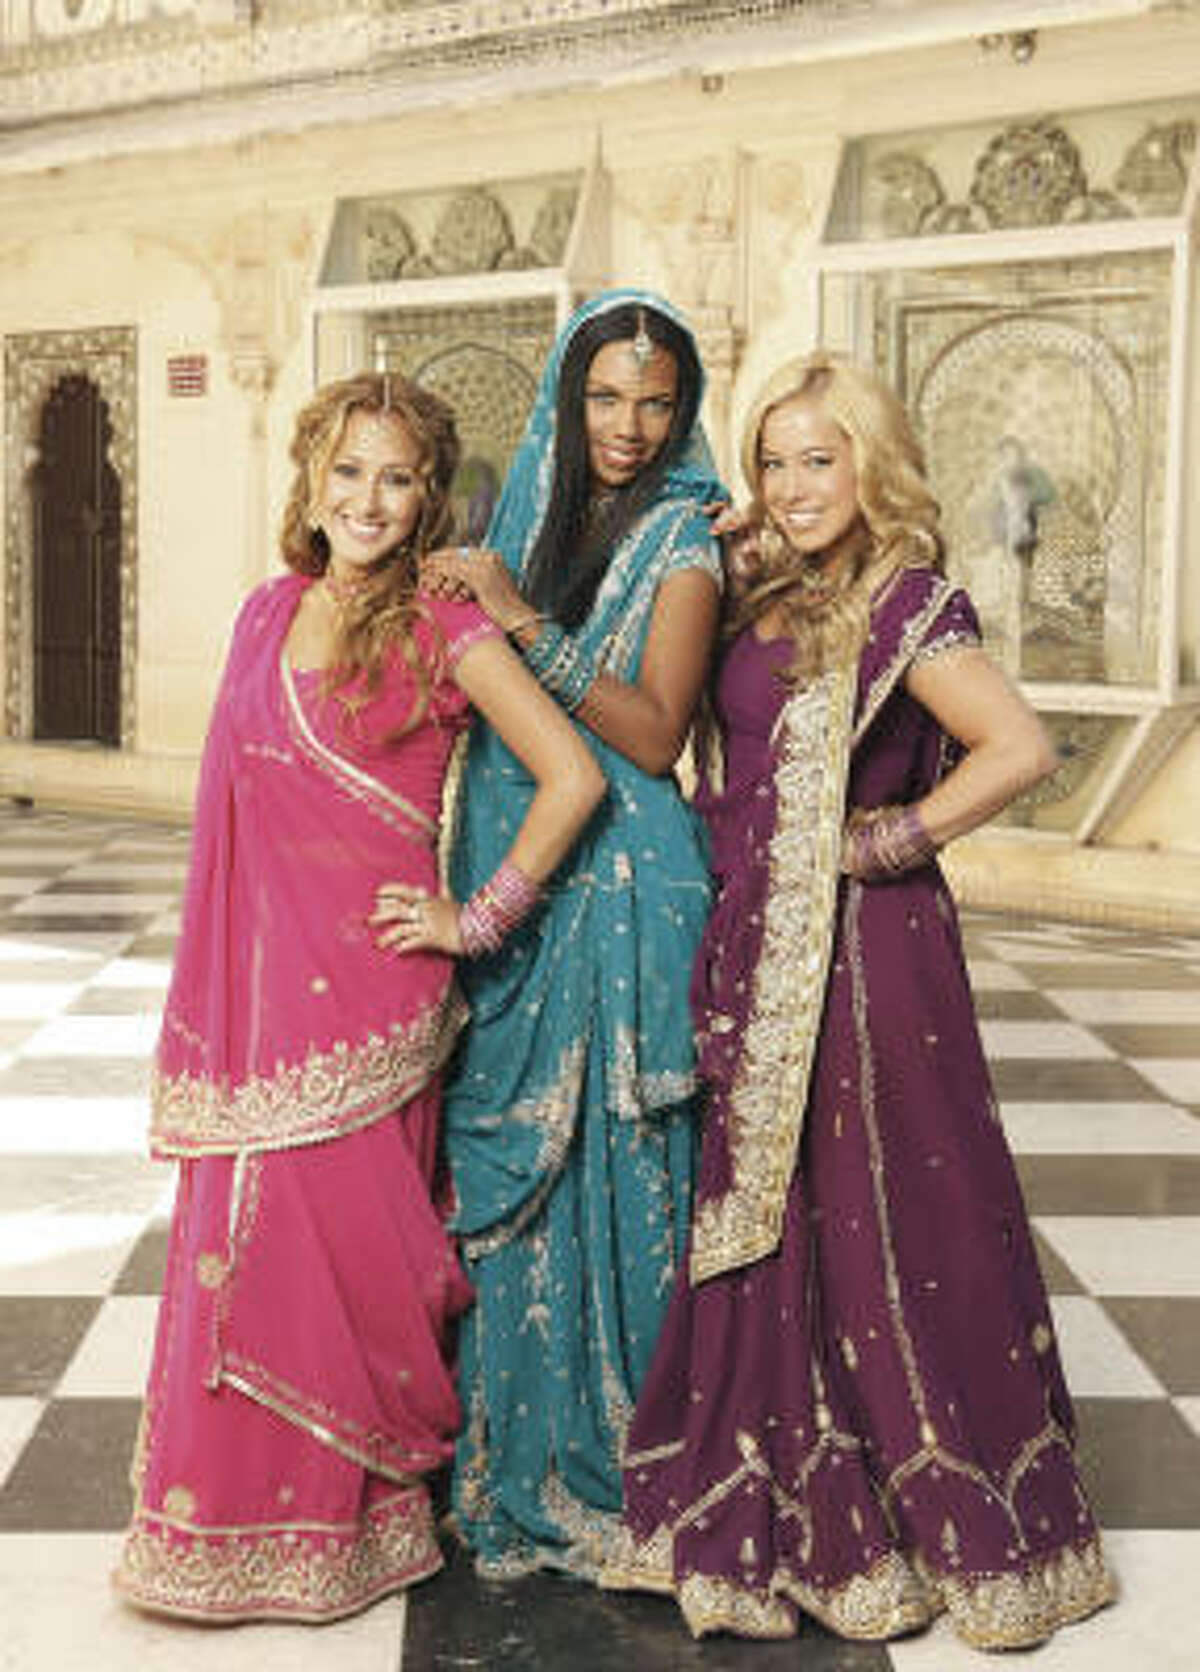 Adrienne Bailon as "Chanel," from left, Kiely Williams as "Aqua" and Sabrina Bryan as "Dorinda" star in The Cheetah Girls One World airing on the Disney Channel.